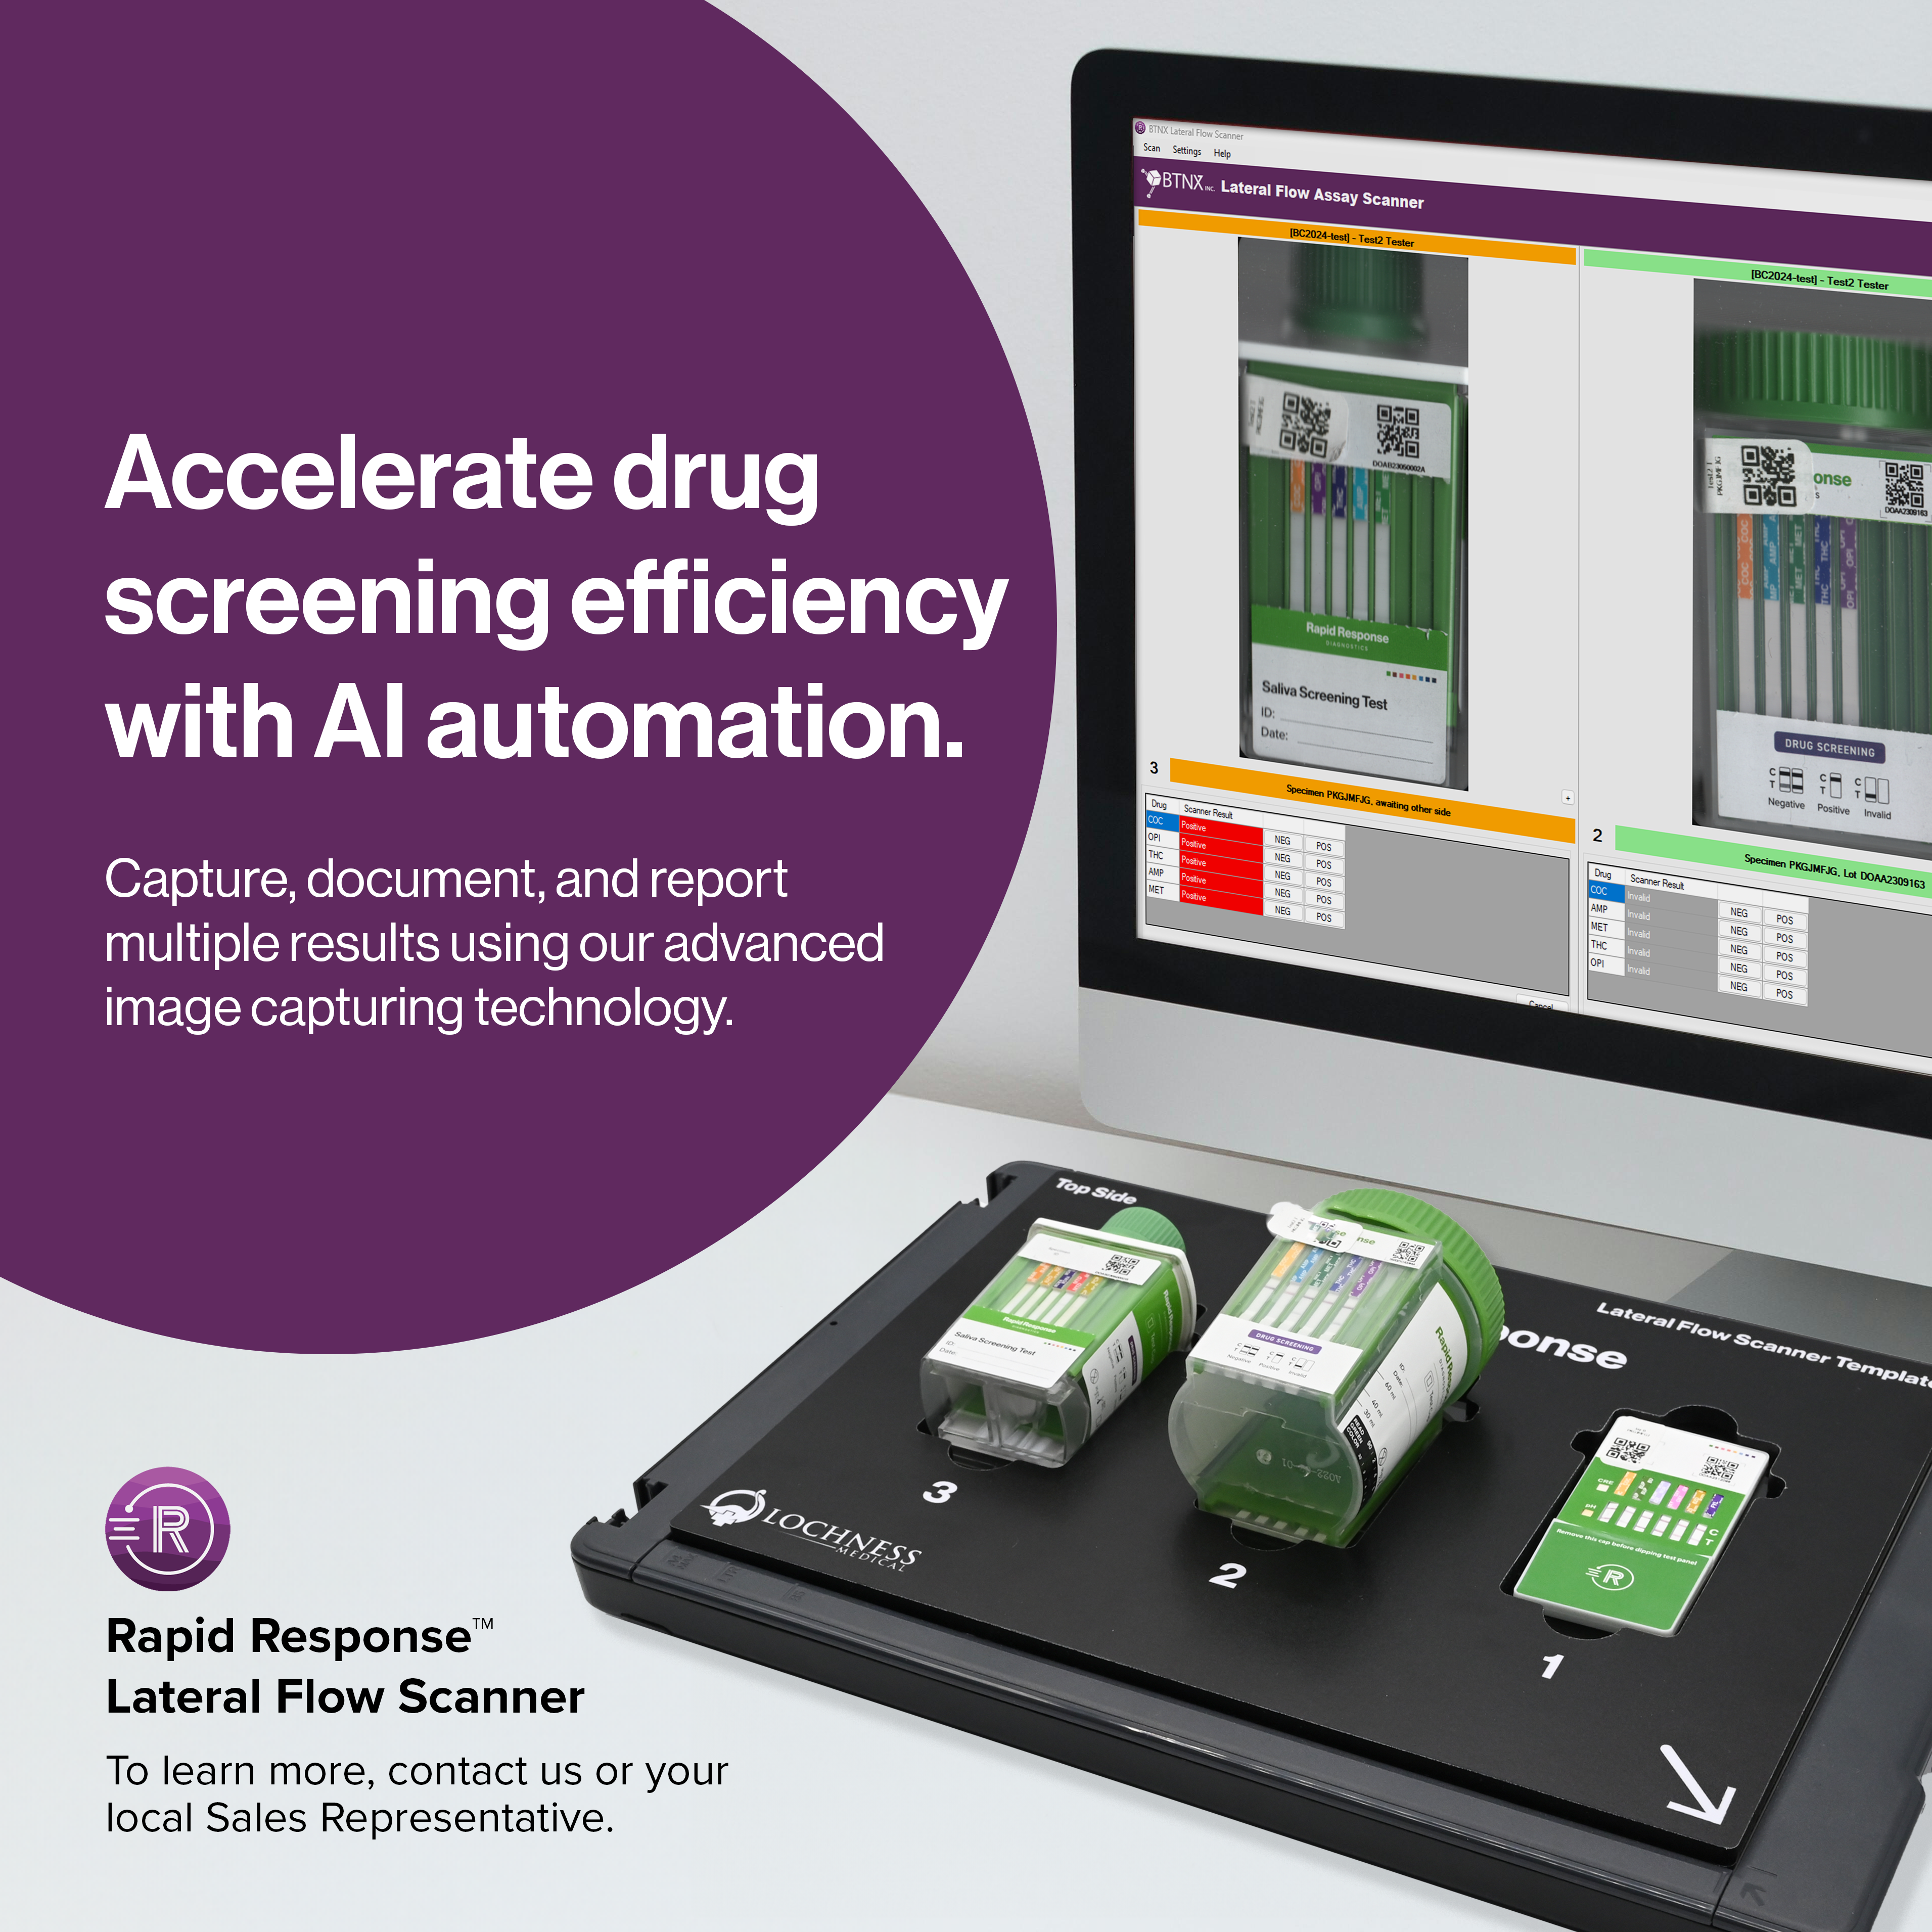 Multi-Drug Test Panel with Lateral Flow Scanner